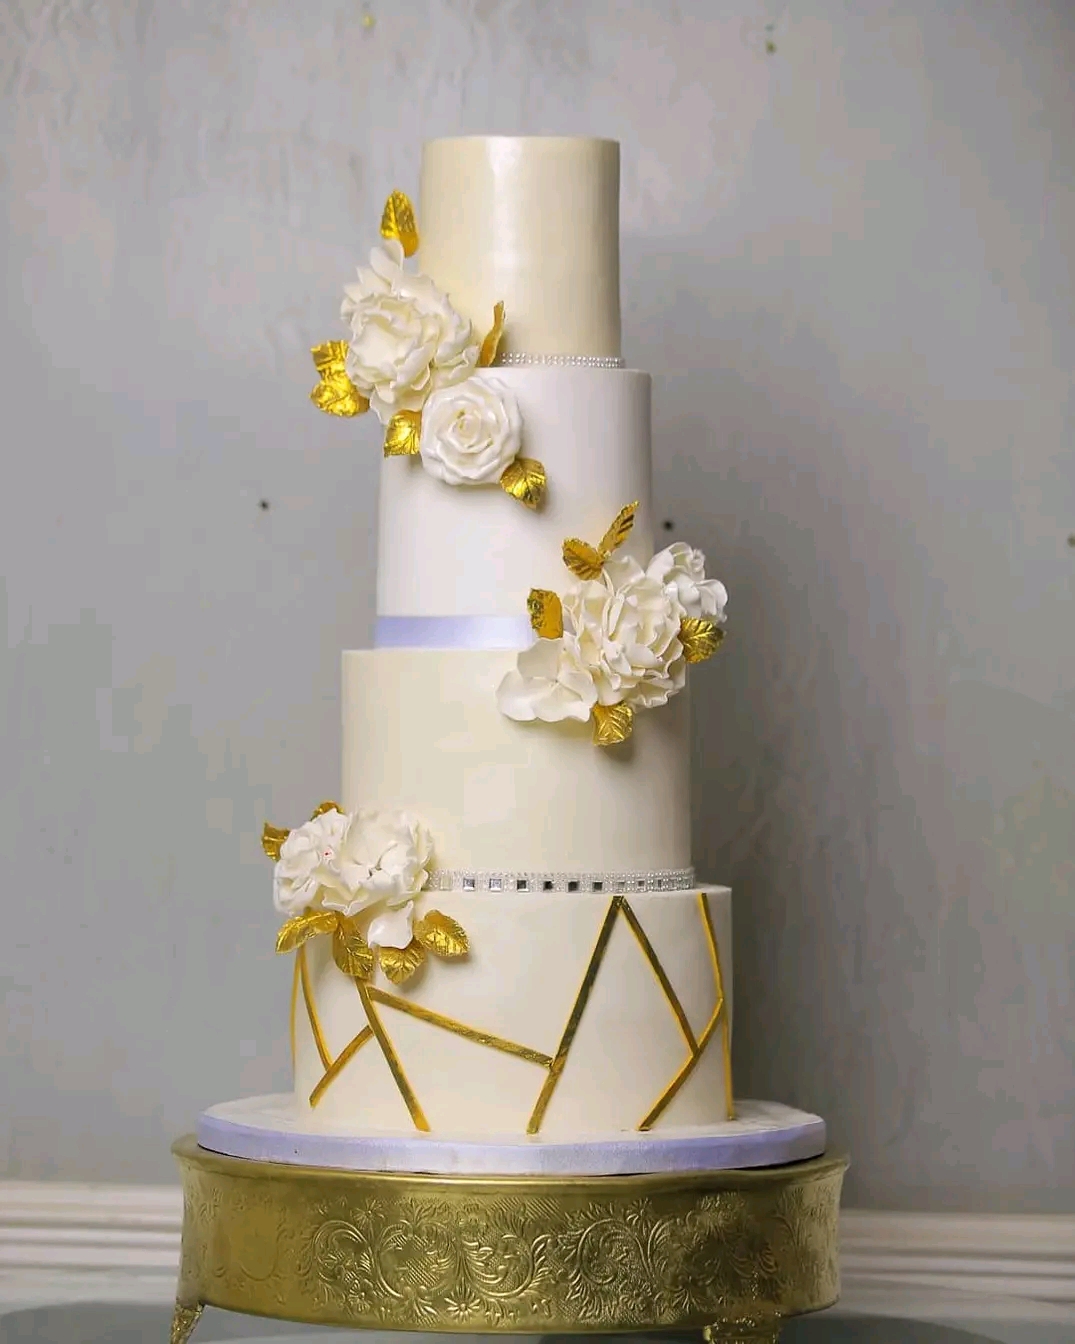 OFF-WHITE AND GOLDEN CAKE 